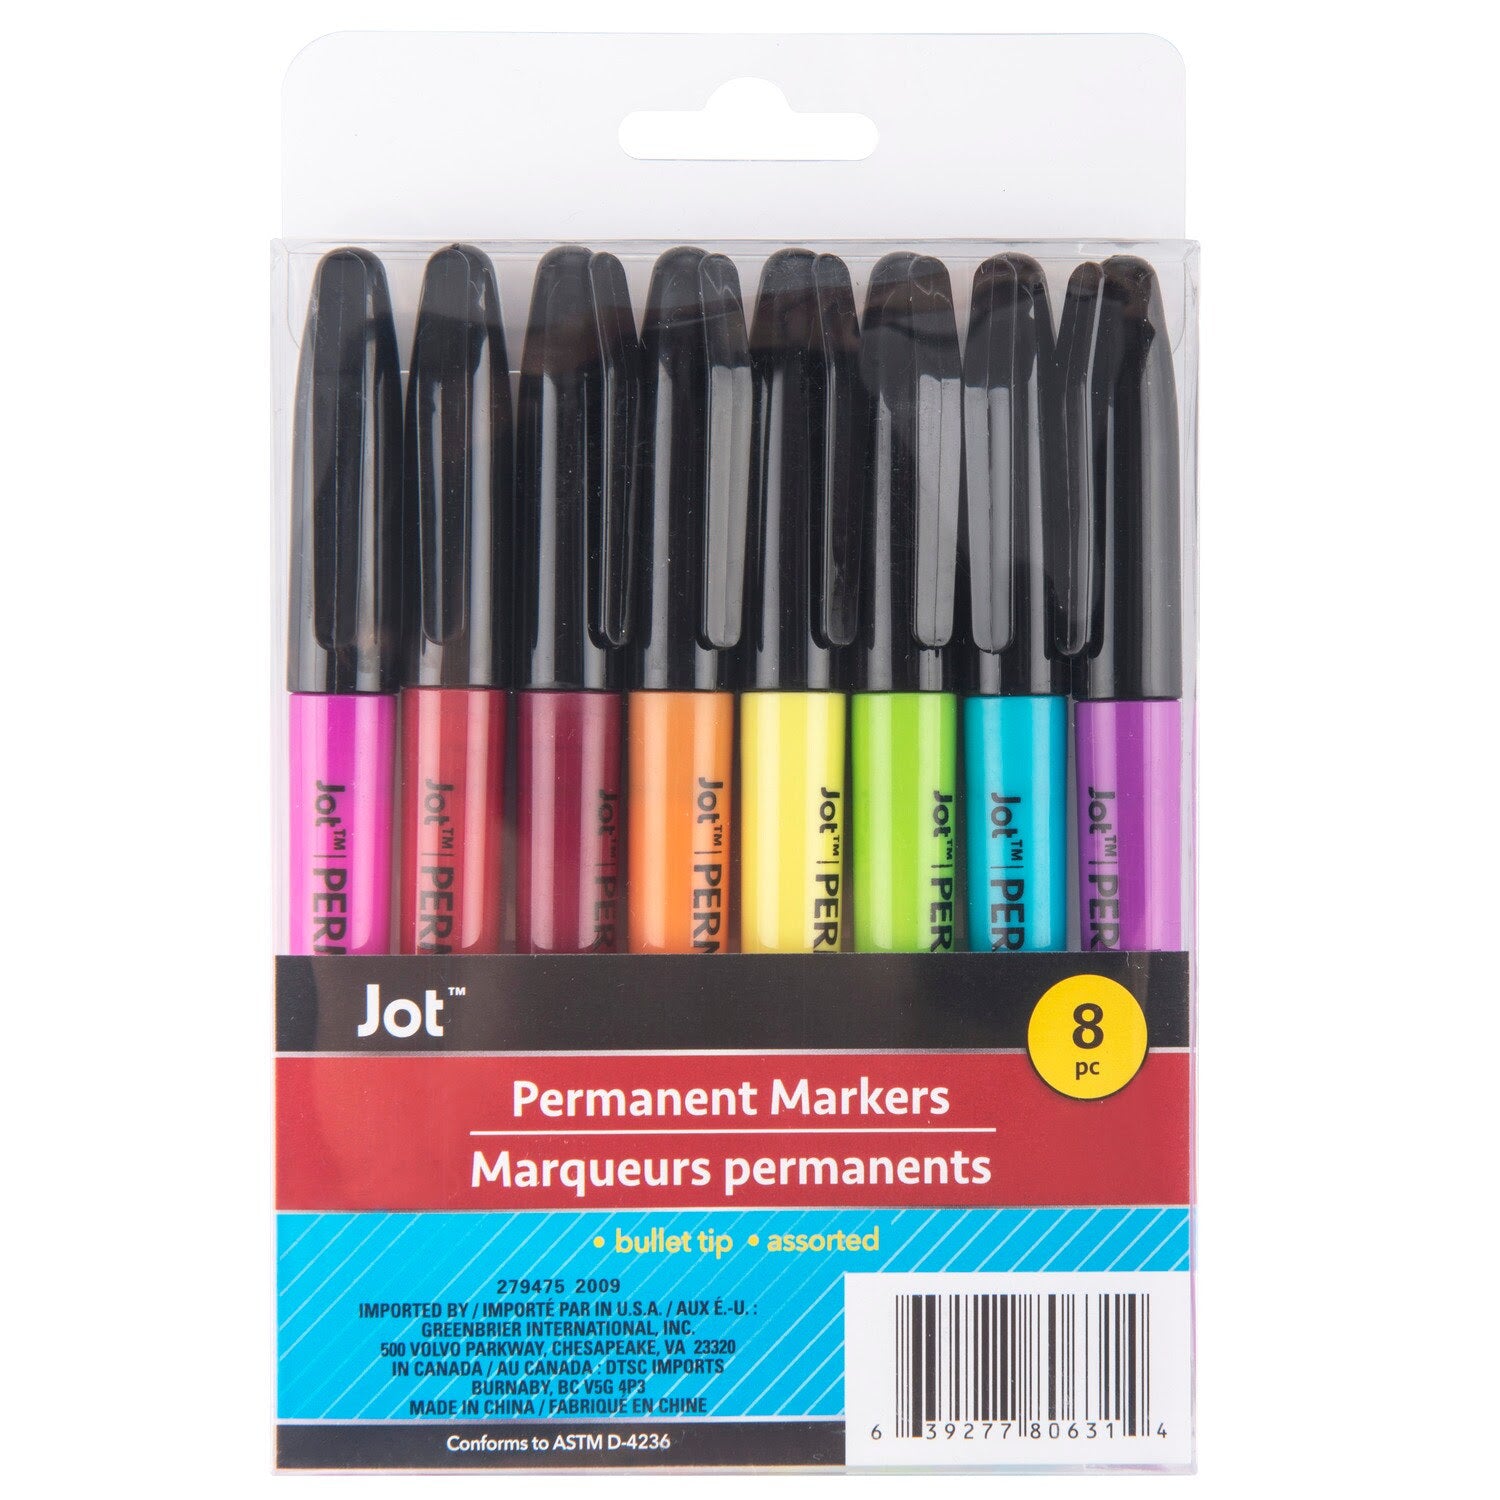 Permanent Markers (8/pack)